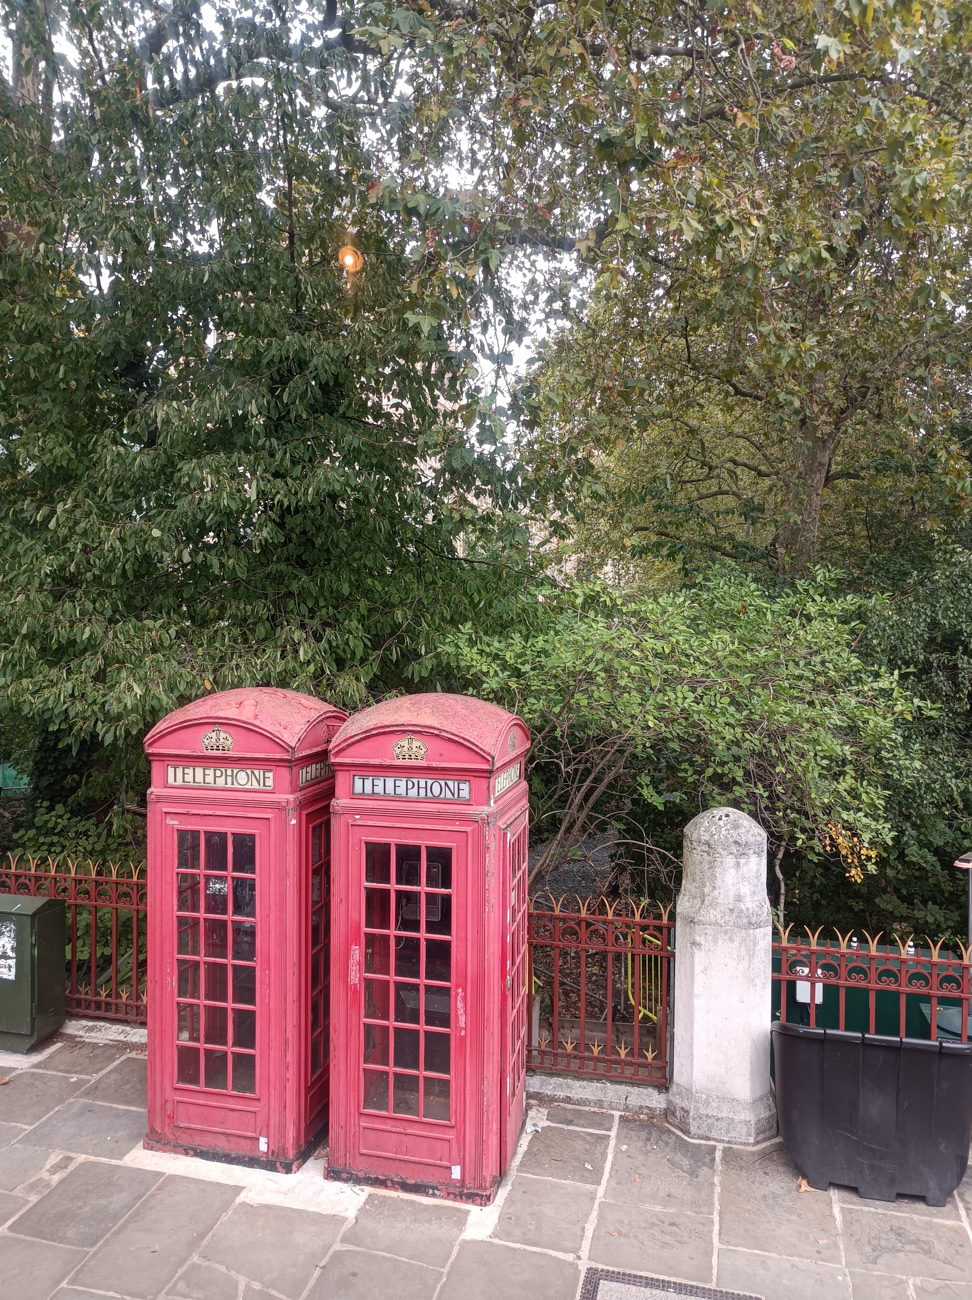 London’s Iconic Red Phone Boxes: A Nostalgic Symbol of the Capital